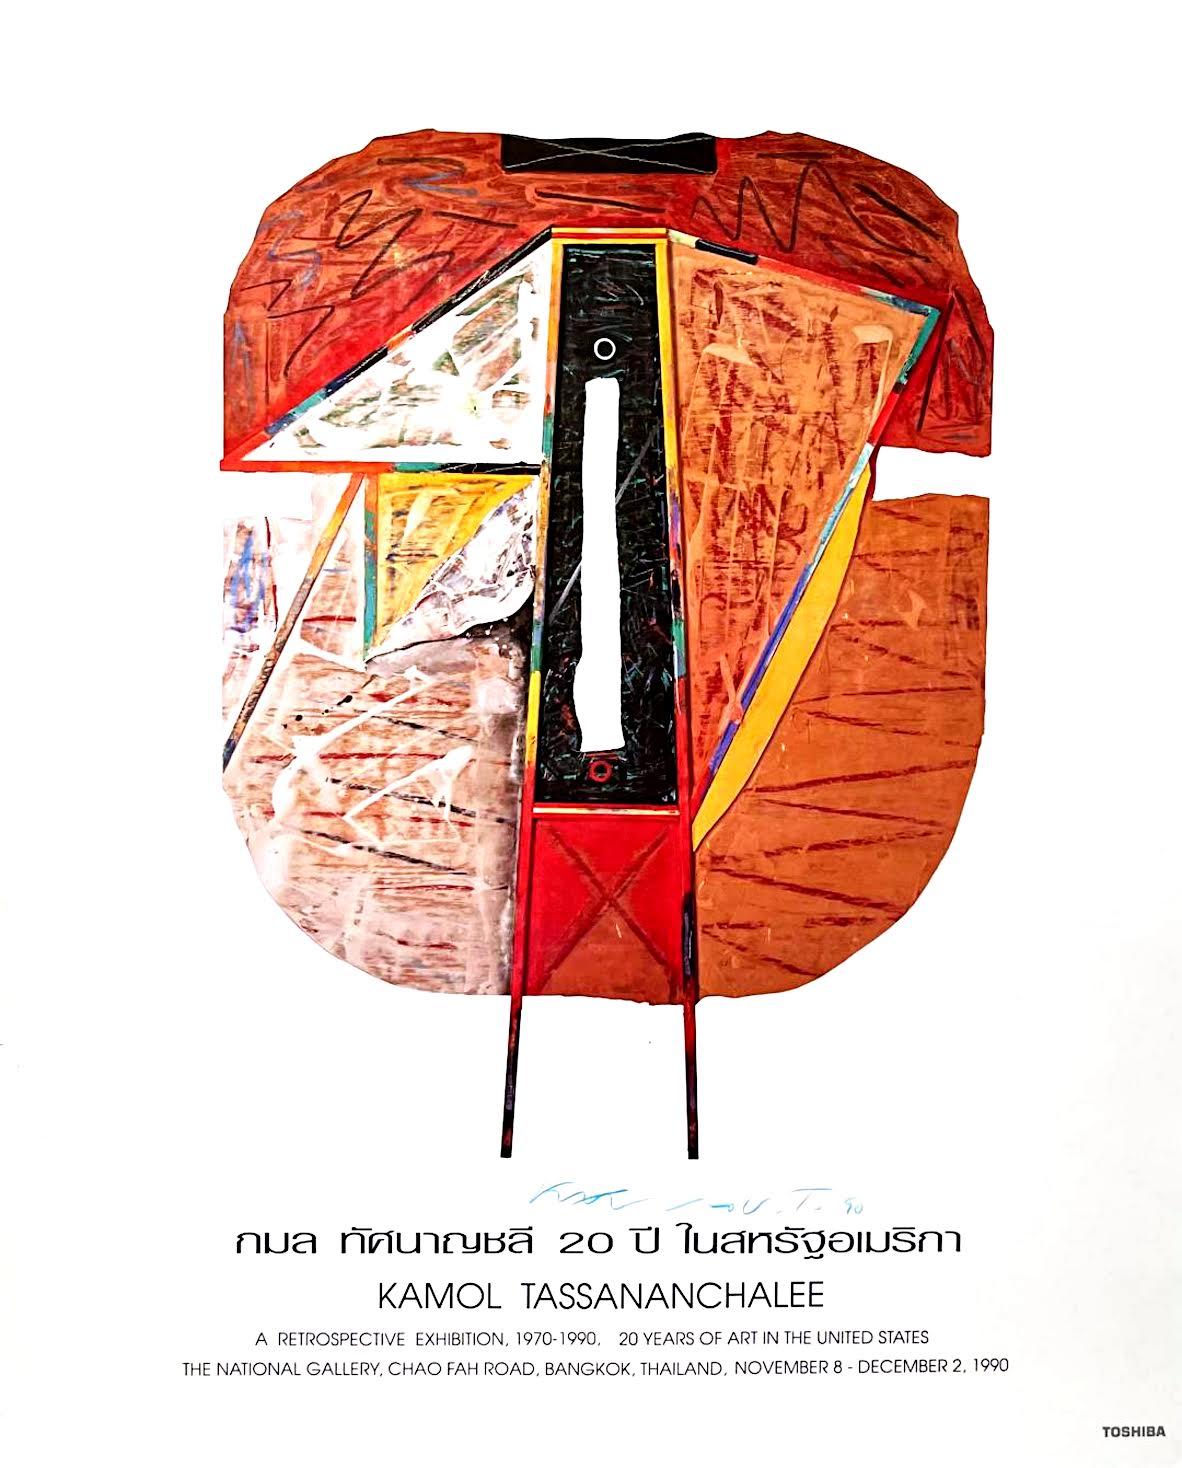 Retrospective exhibition poster, The National Gallery, Thailand (Hand signed) - Print by Kamol Tassananchalee